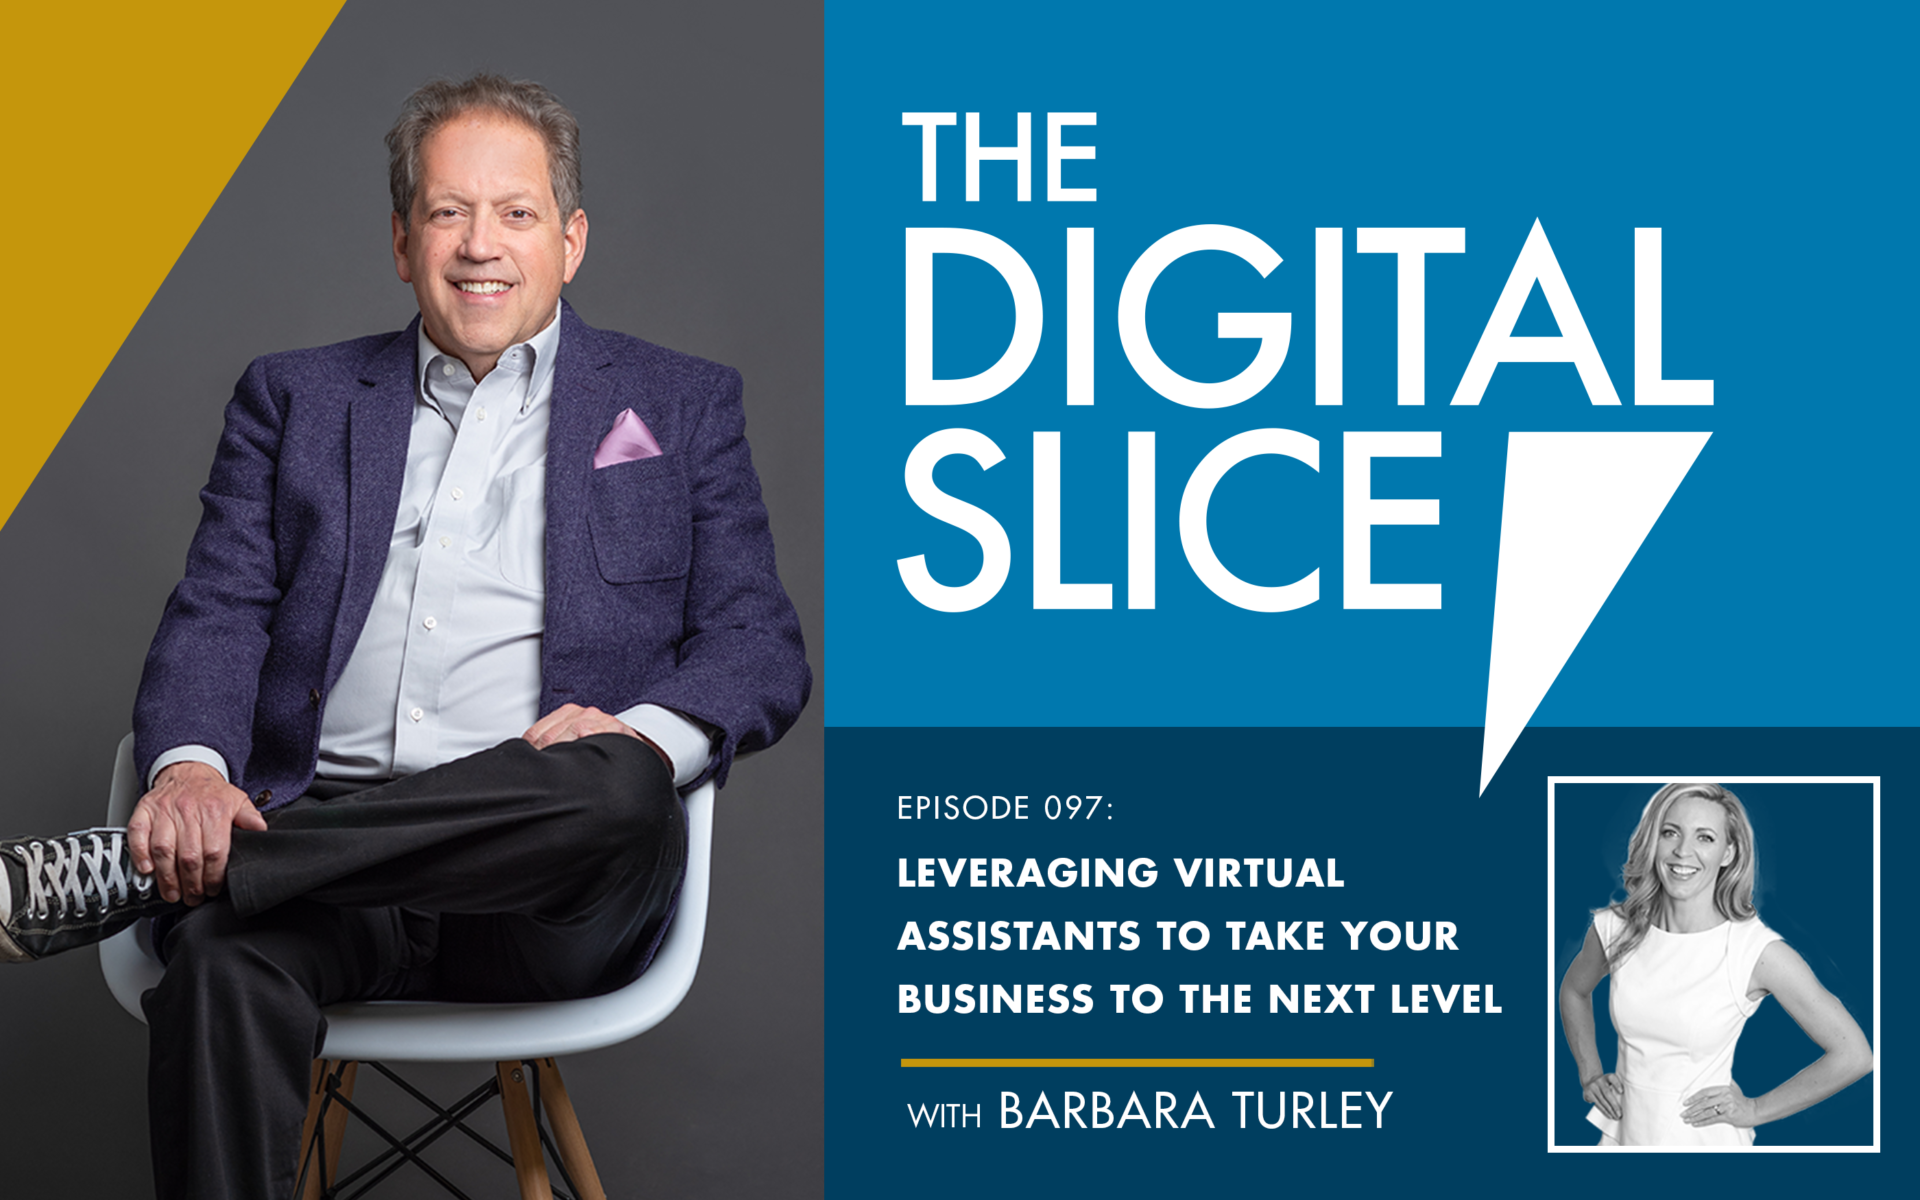 [PODCAST] Leveraging Virtual Assistants To Take Your Business To The Next Level